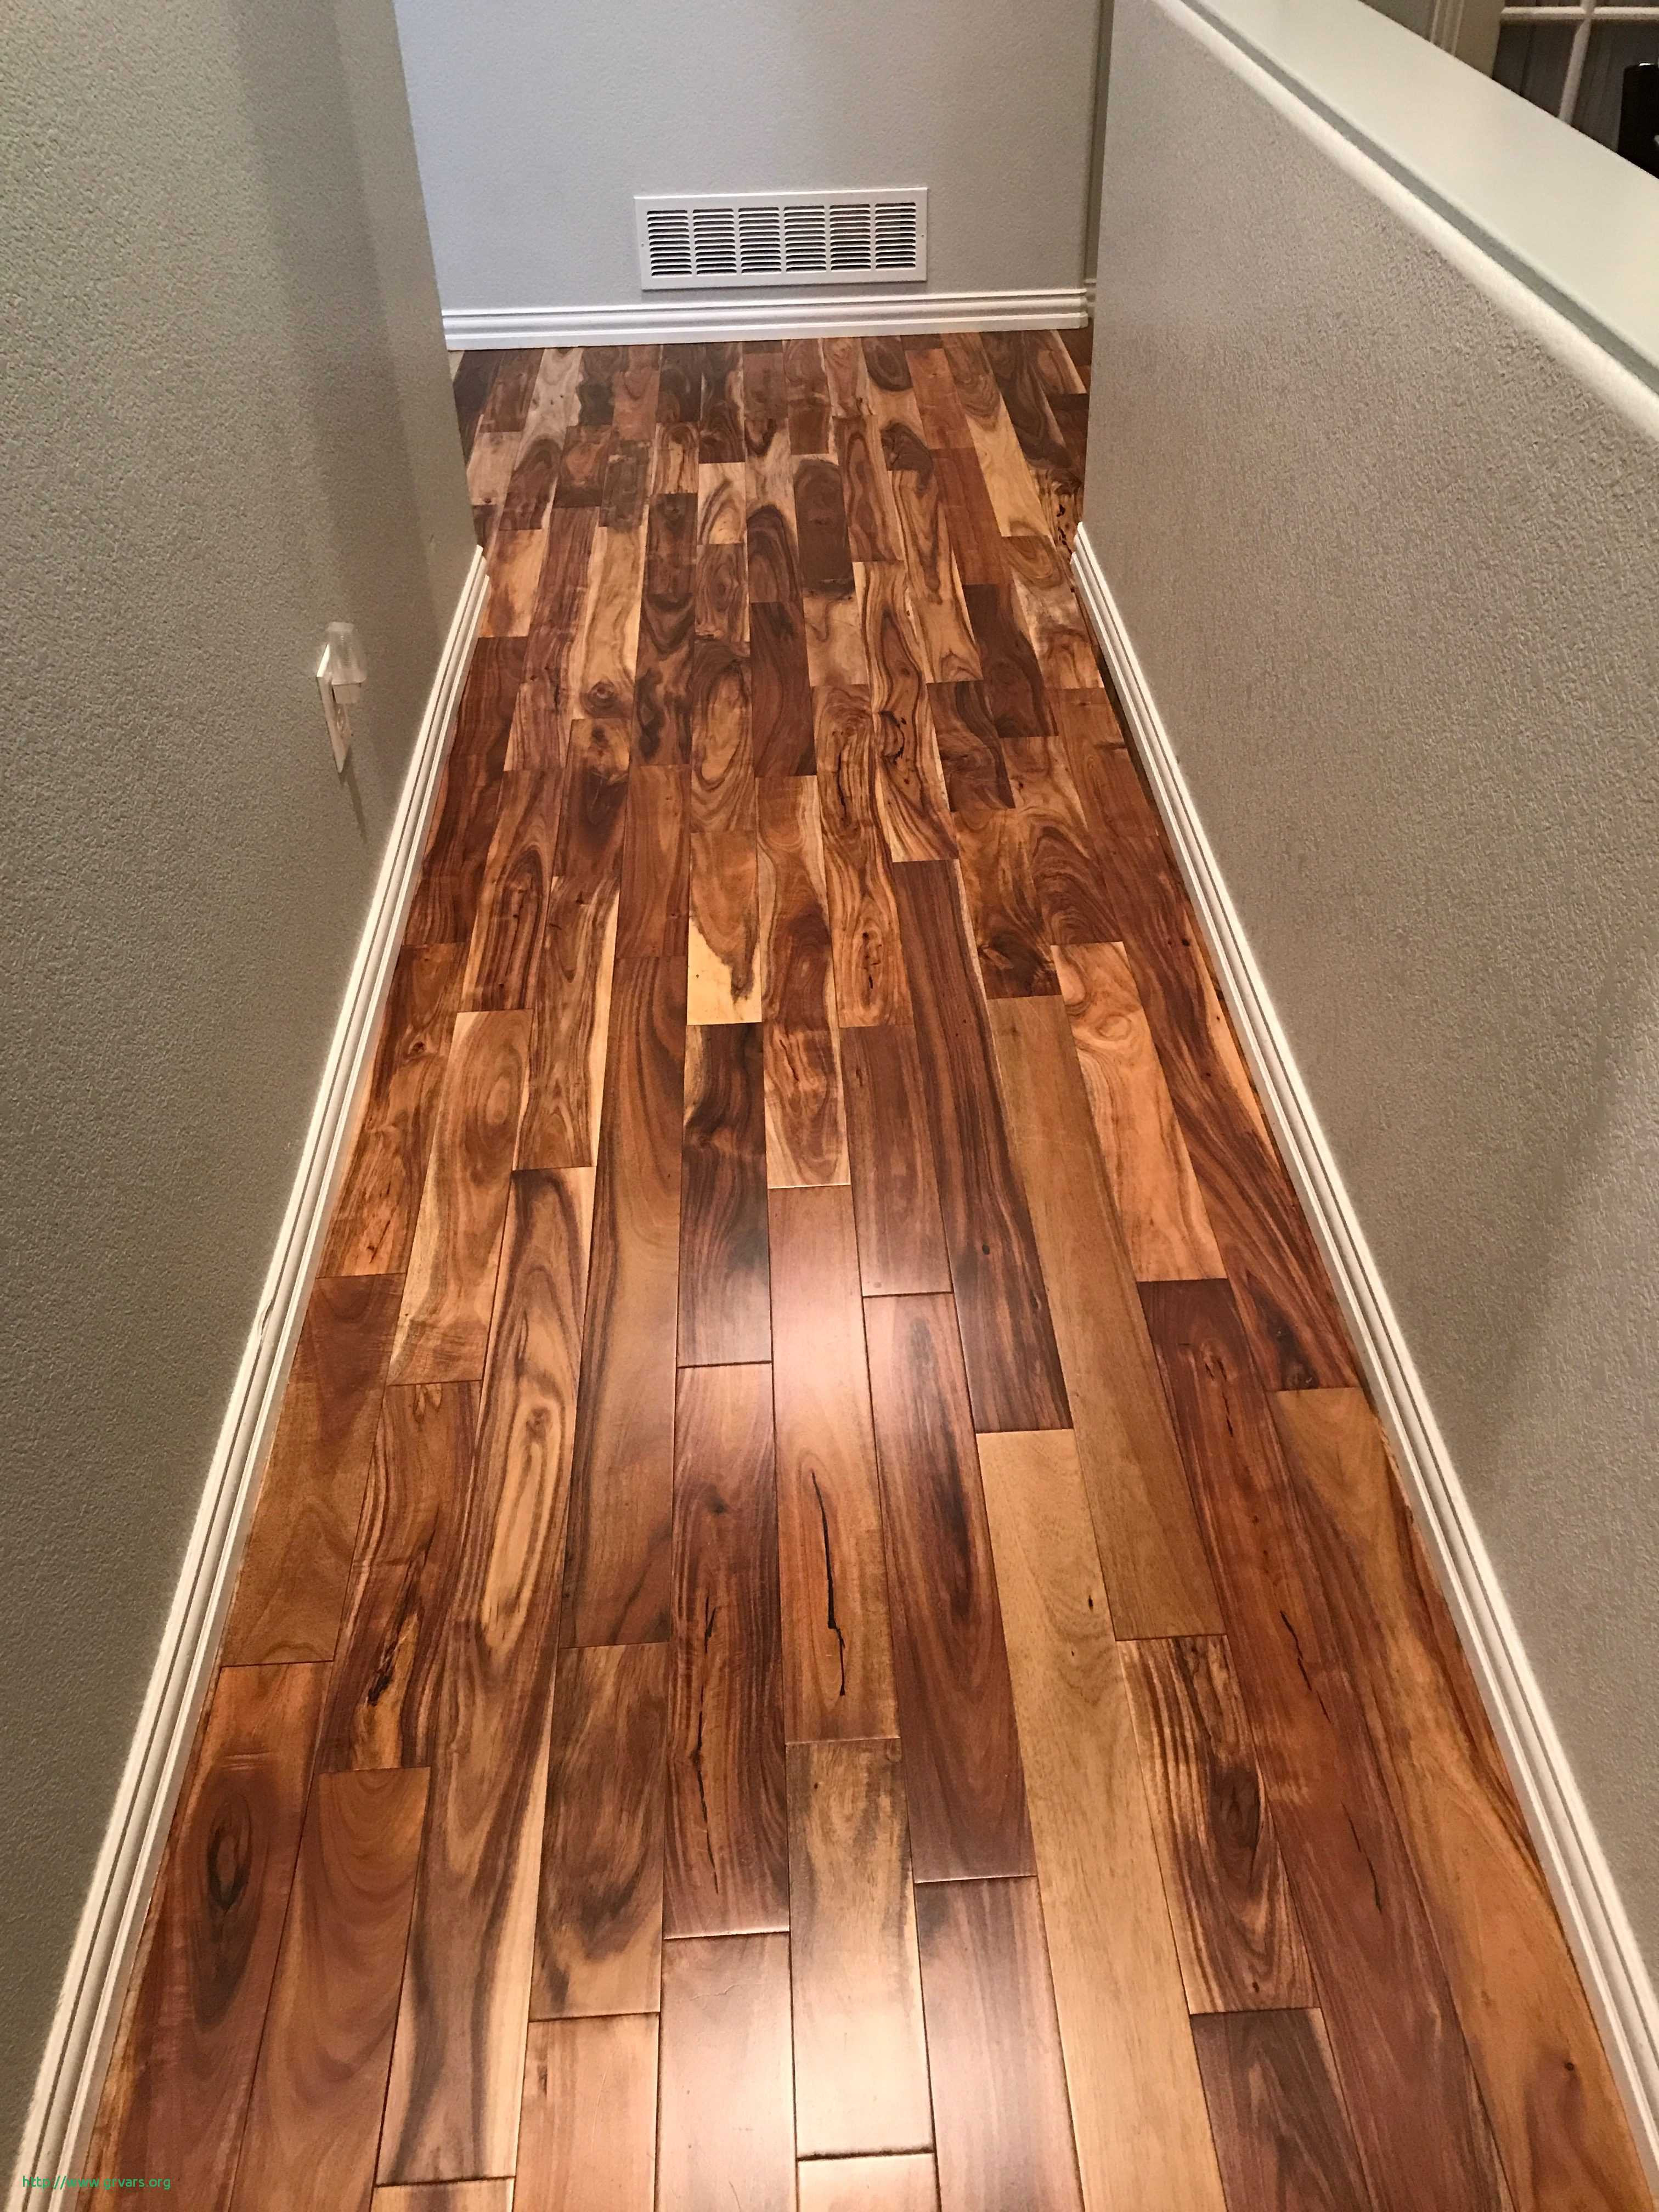 hardwood floor repair austin of 24 luxe wood floor expansion joint ideas blog with wood floor expansion joint alagant engineered hardwood floorscapers